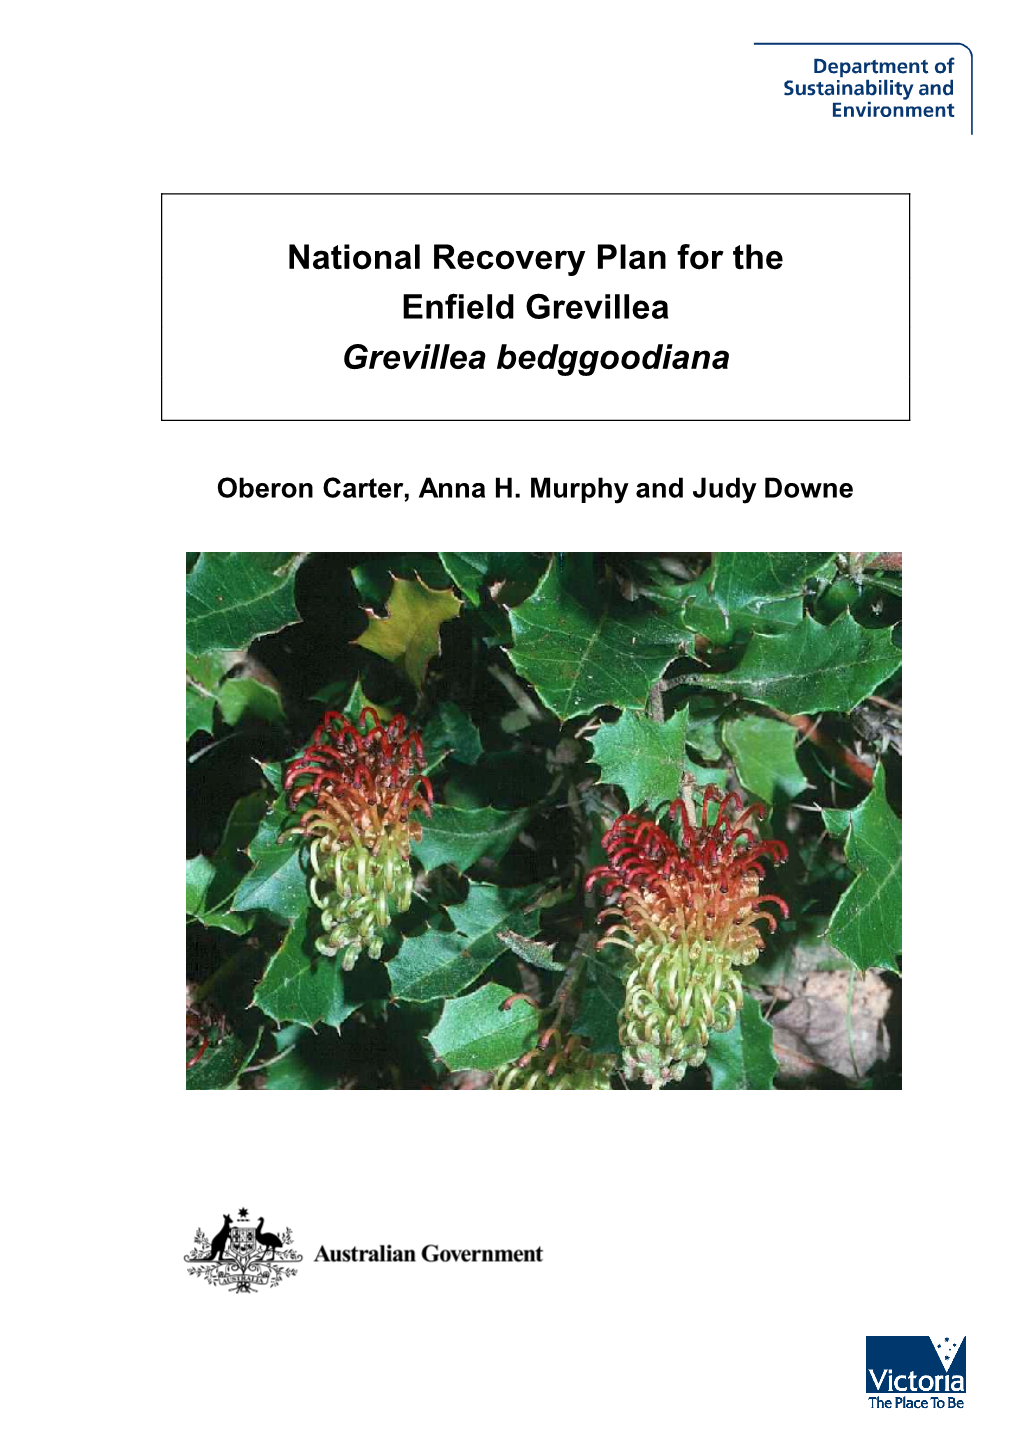 National Recovery Plan for the Enfield Grevillea Grevillea Bedggoodiana